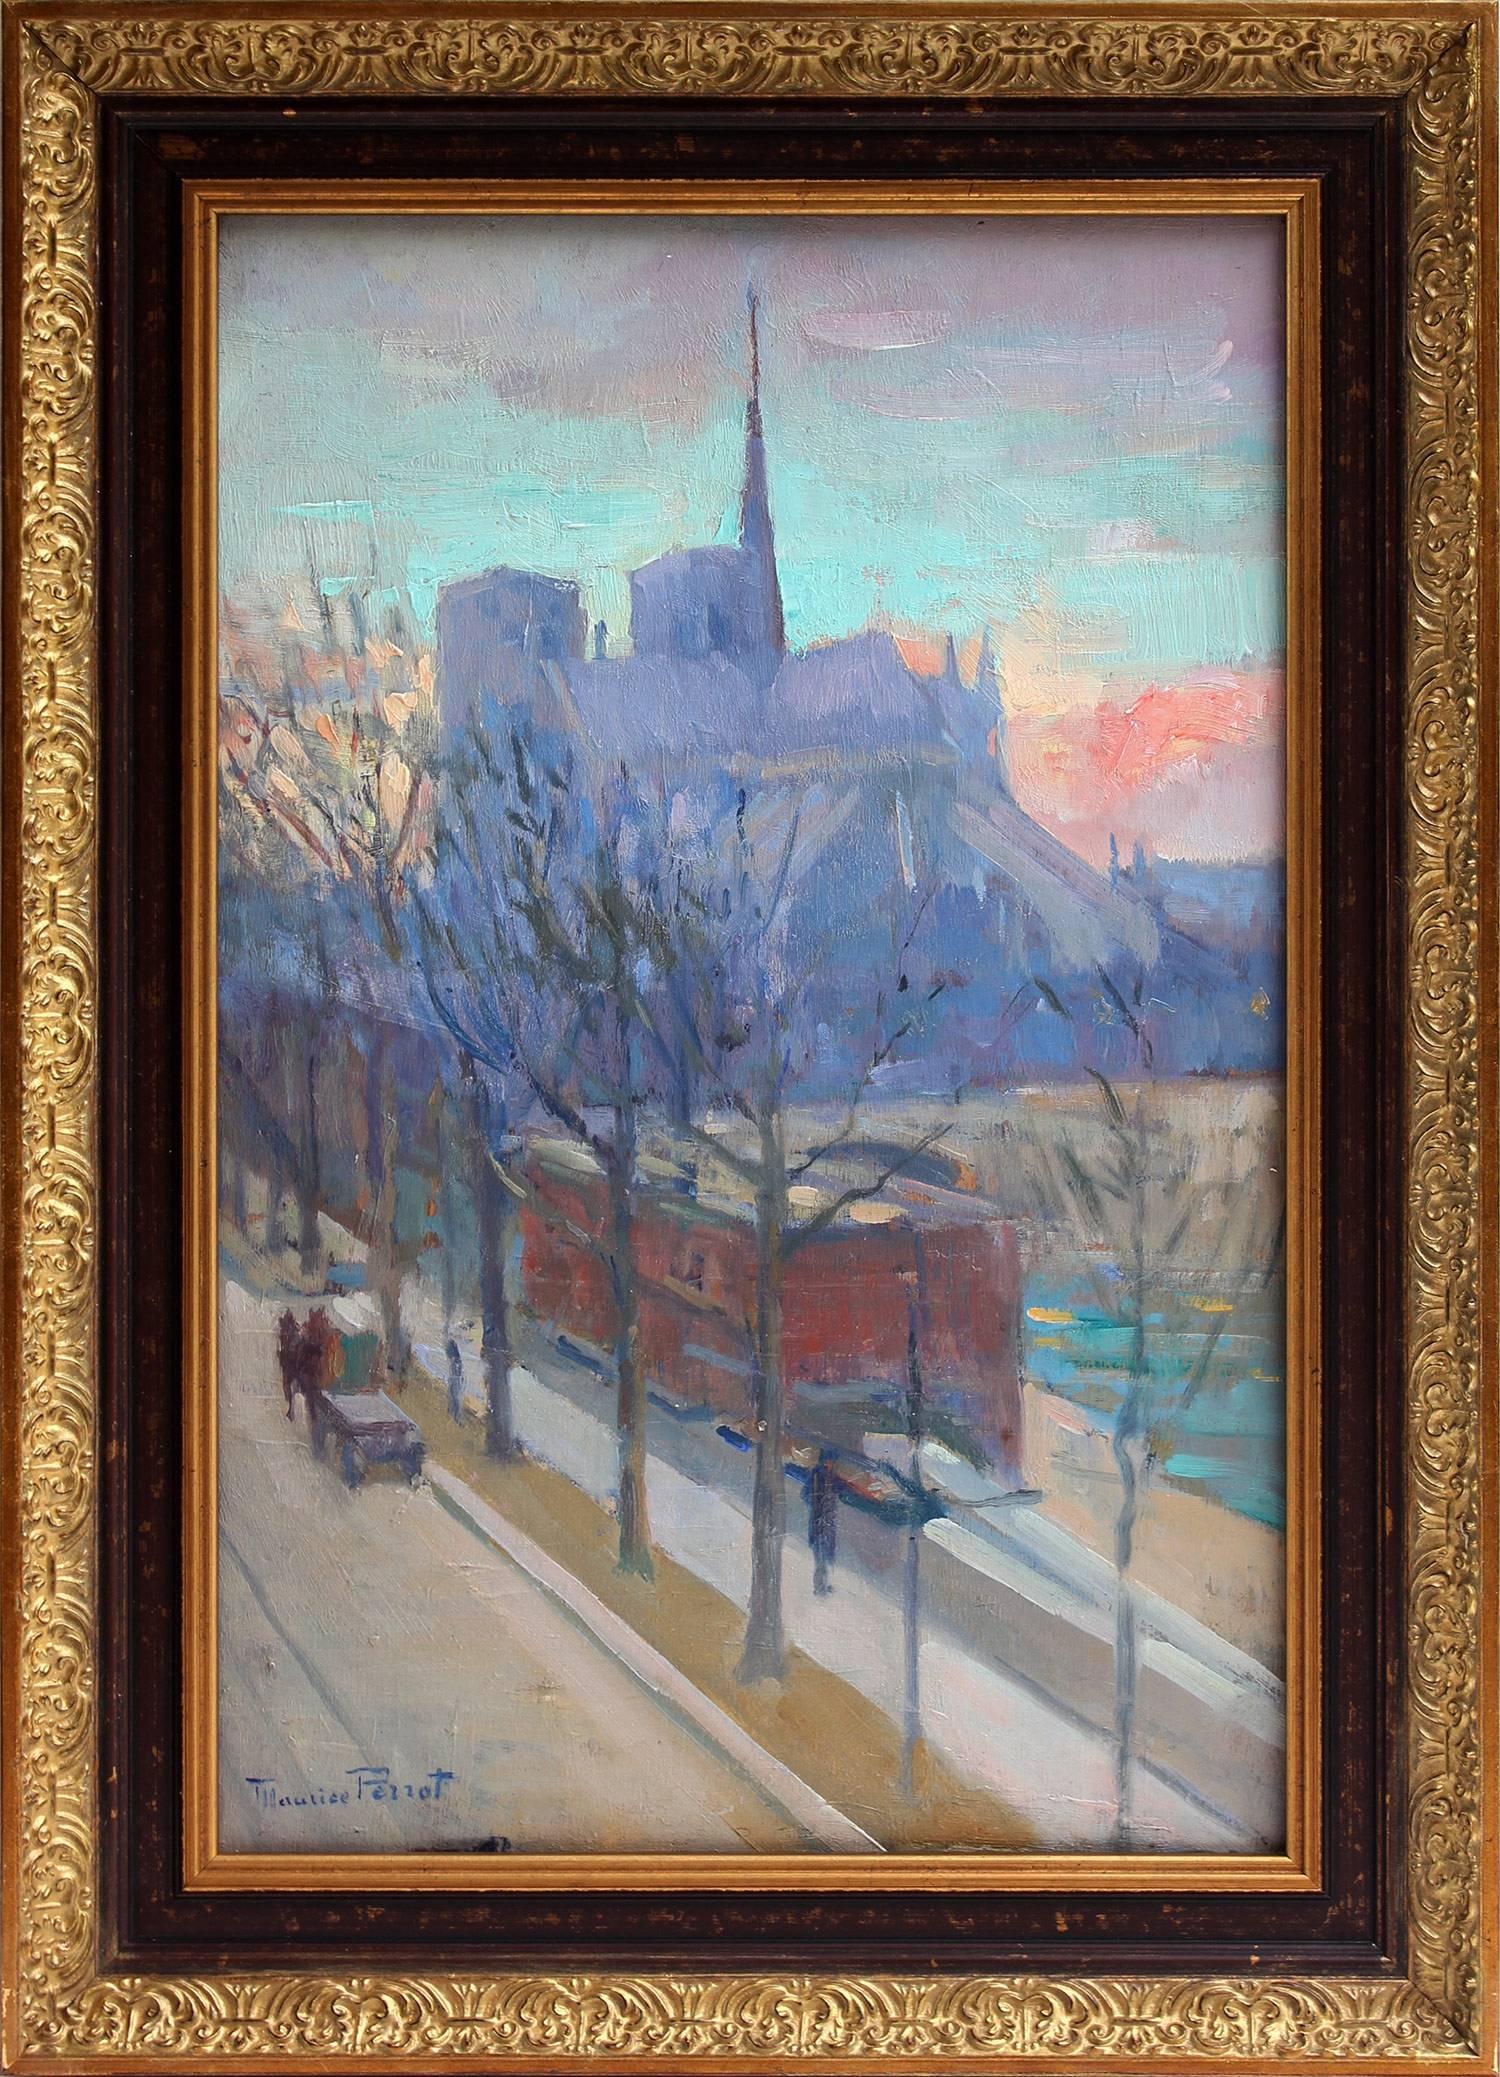 Maurice F. Perrot Landscape Painting - "Scene of Notre Dame Paris" French Impressionist Oil on Wood Board Painting